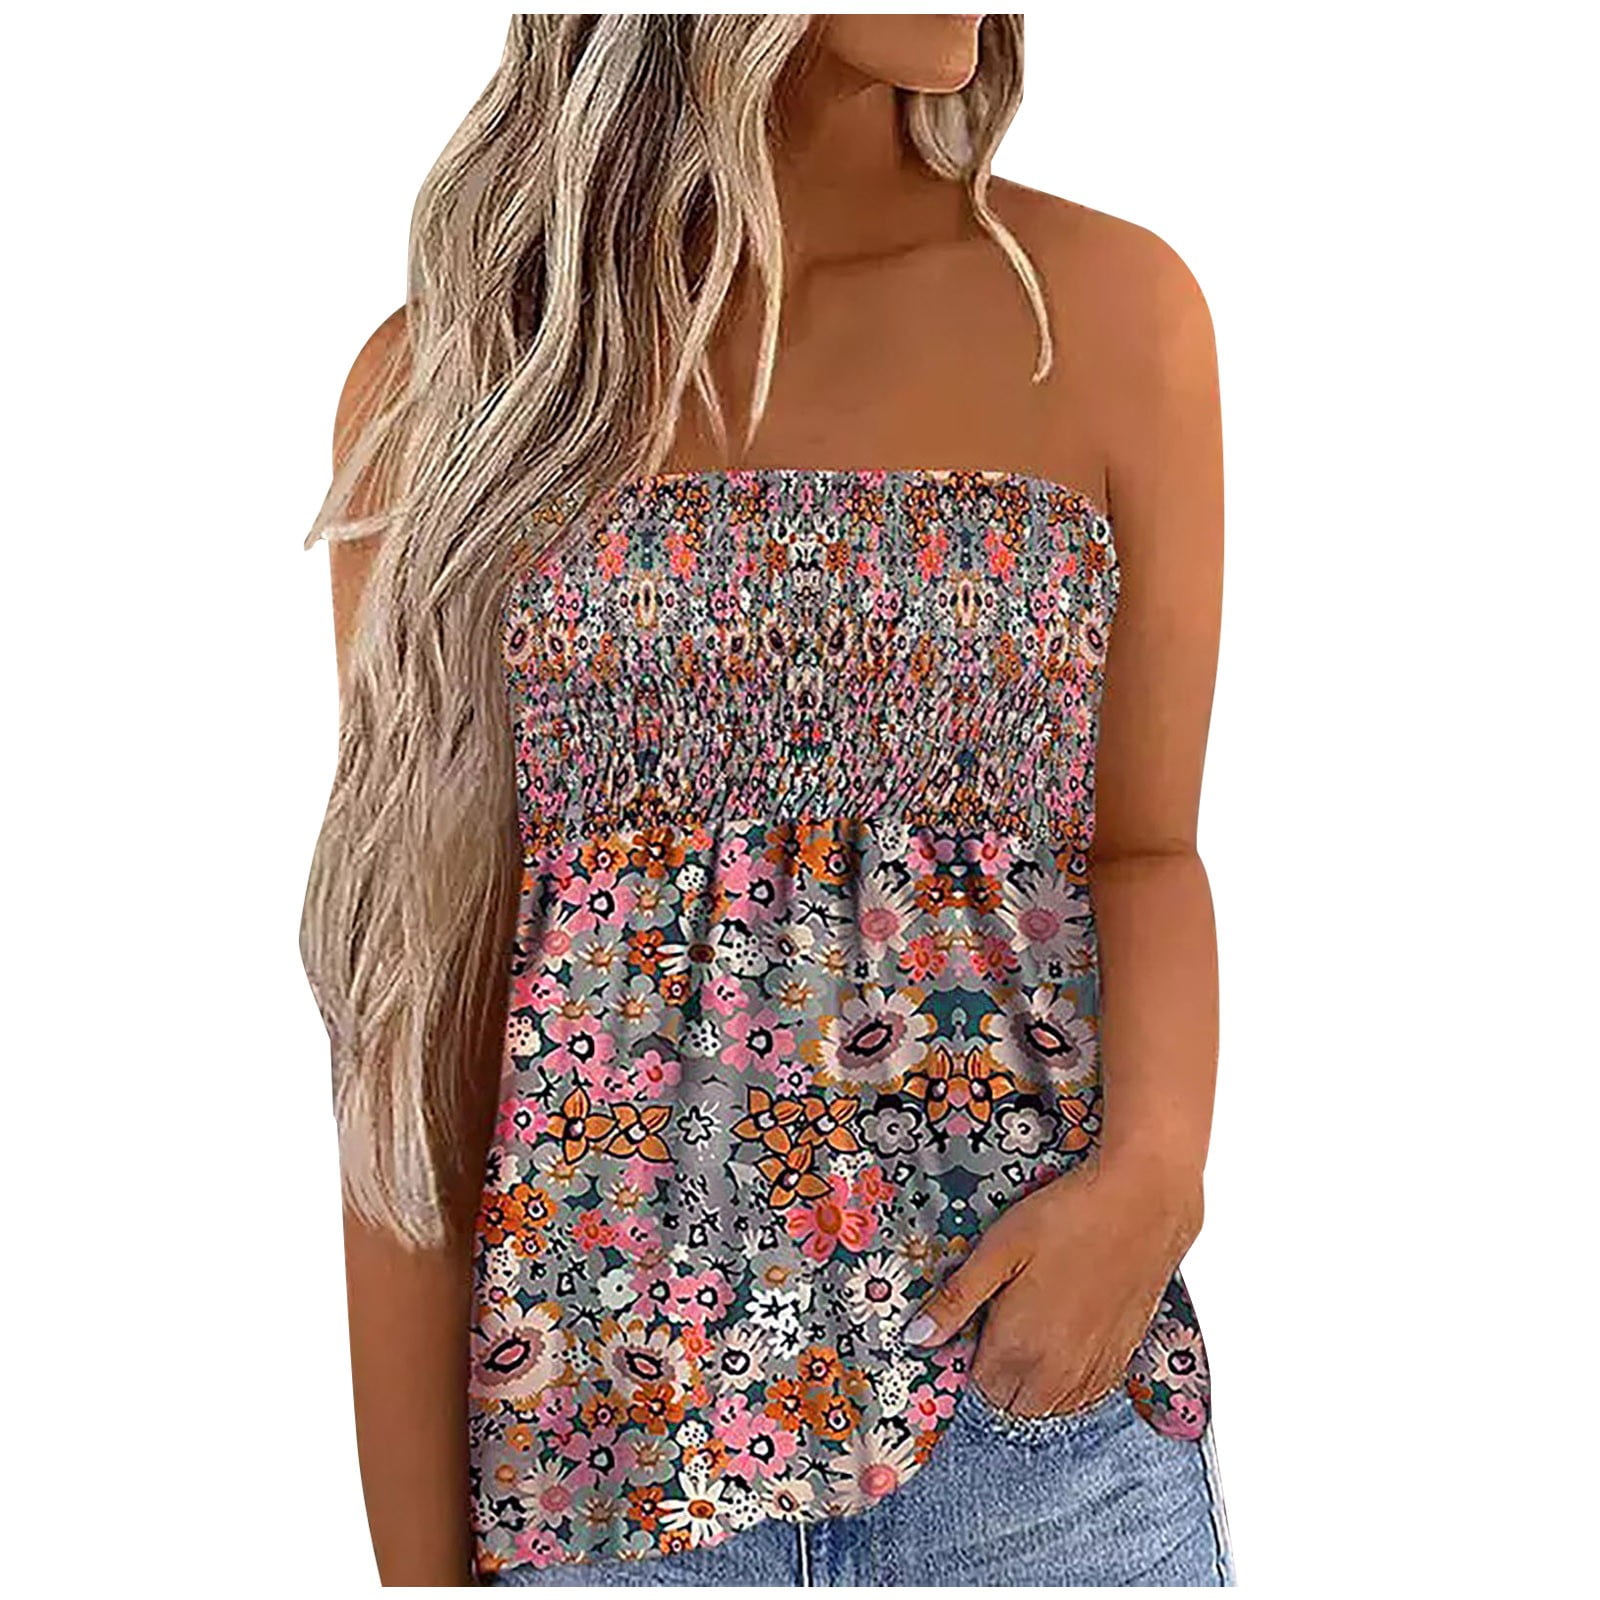 Tube Top with Built in Bra, Women's Fashion Leisure Comfortable Printing  Off-The-Shoulder Tube Tops Blouse, Chain Bra